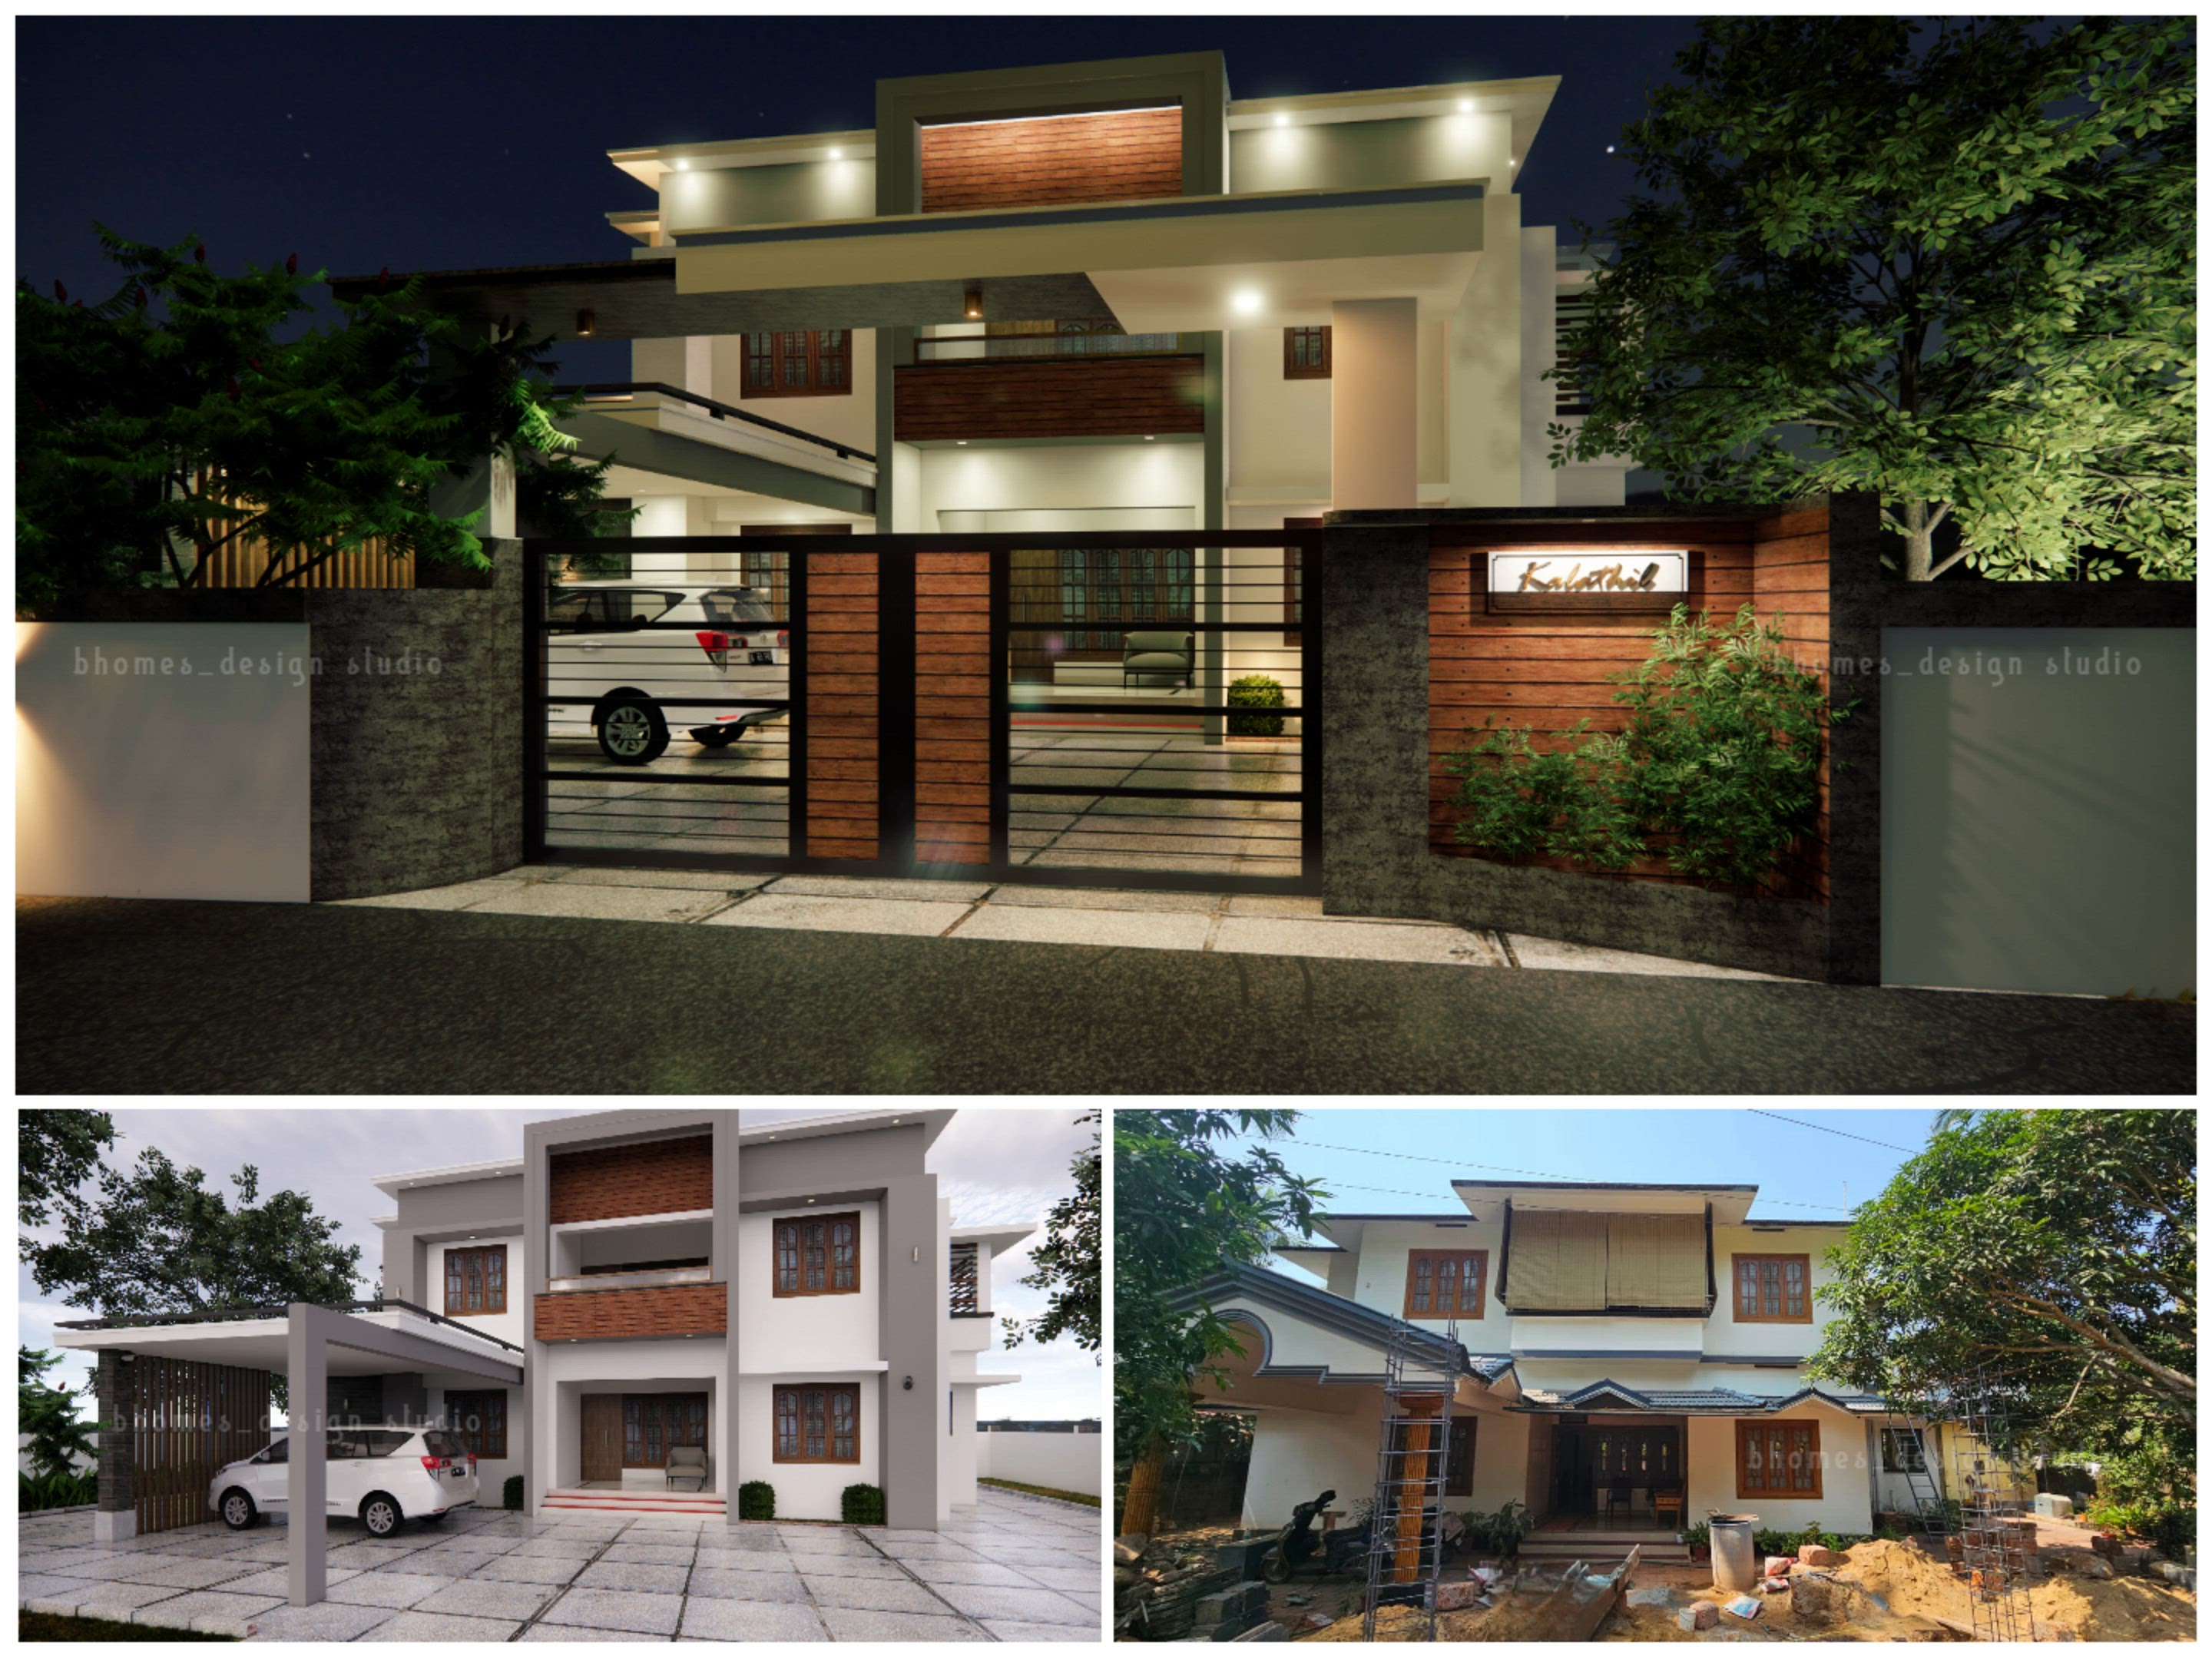 The transformation from day to night in the 3D views of renovation house ..🏚🏘

#home #design #exterior #renovation #3dmodeling 
#keralahomes #minimal #carporch #online3d  #HouseRenovation 
.
.
Contact : 6238684617 , 9947368410
( for 3D renovation work , send your existing plan or site photo to whatsapp)